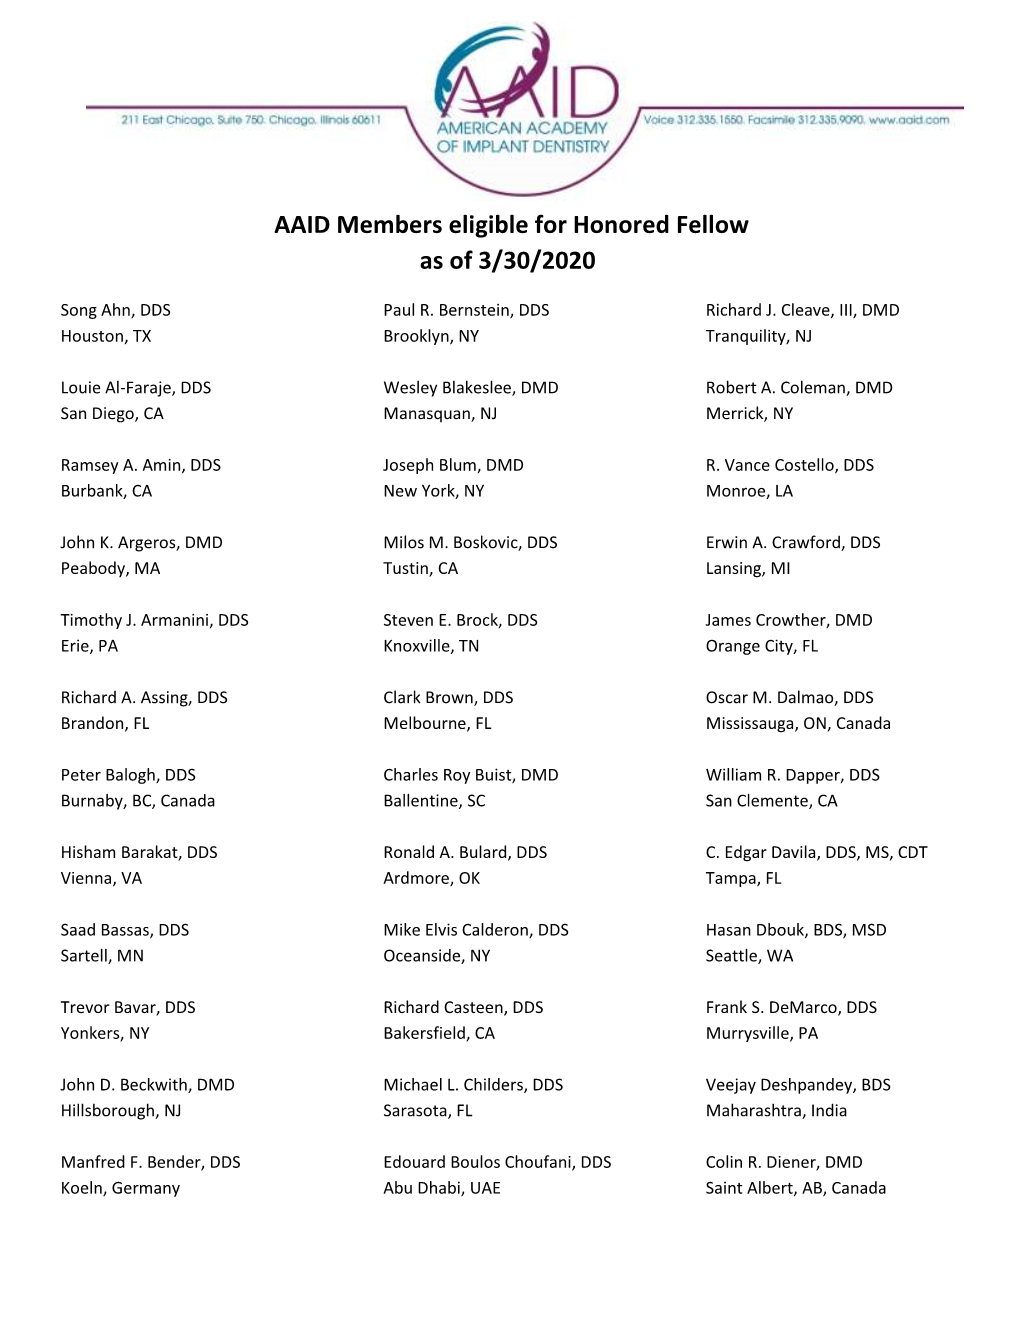 AAID Members Eligible for Honored Fellow As of 3/30/2020